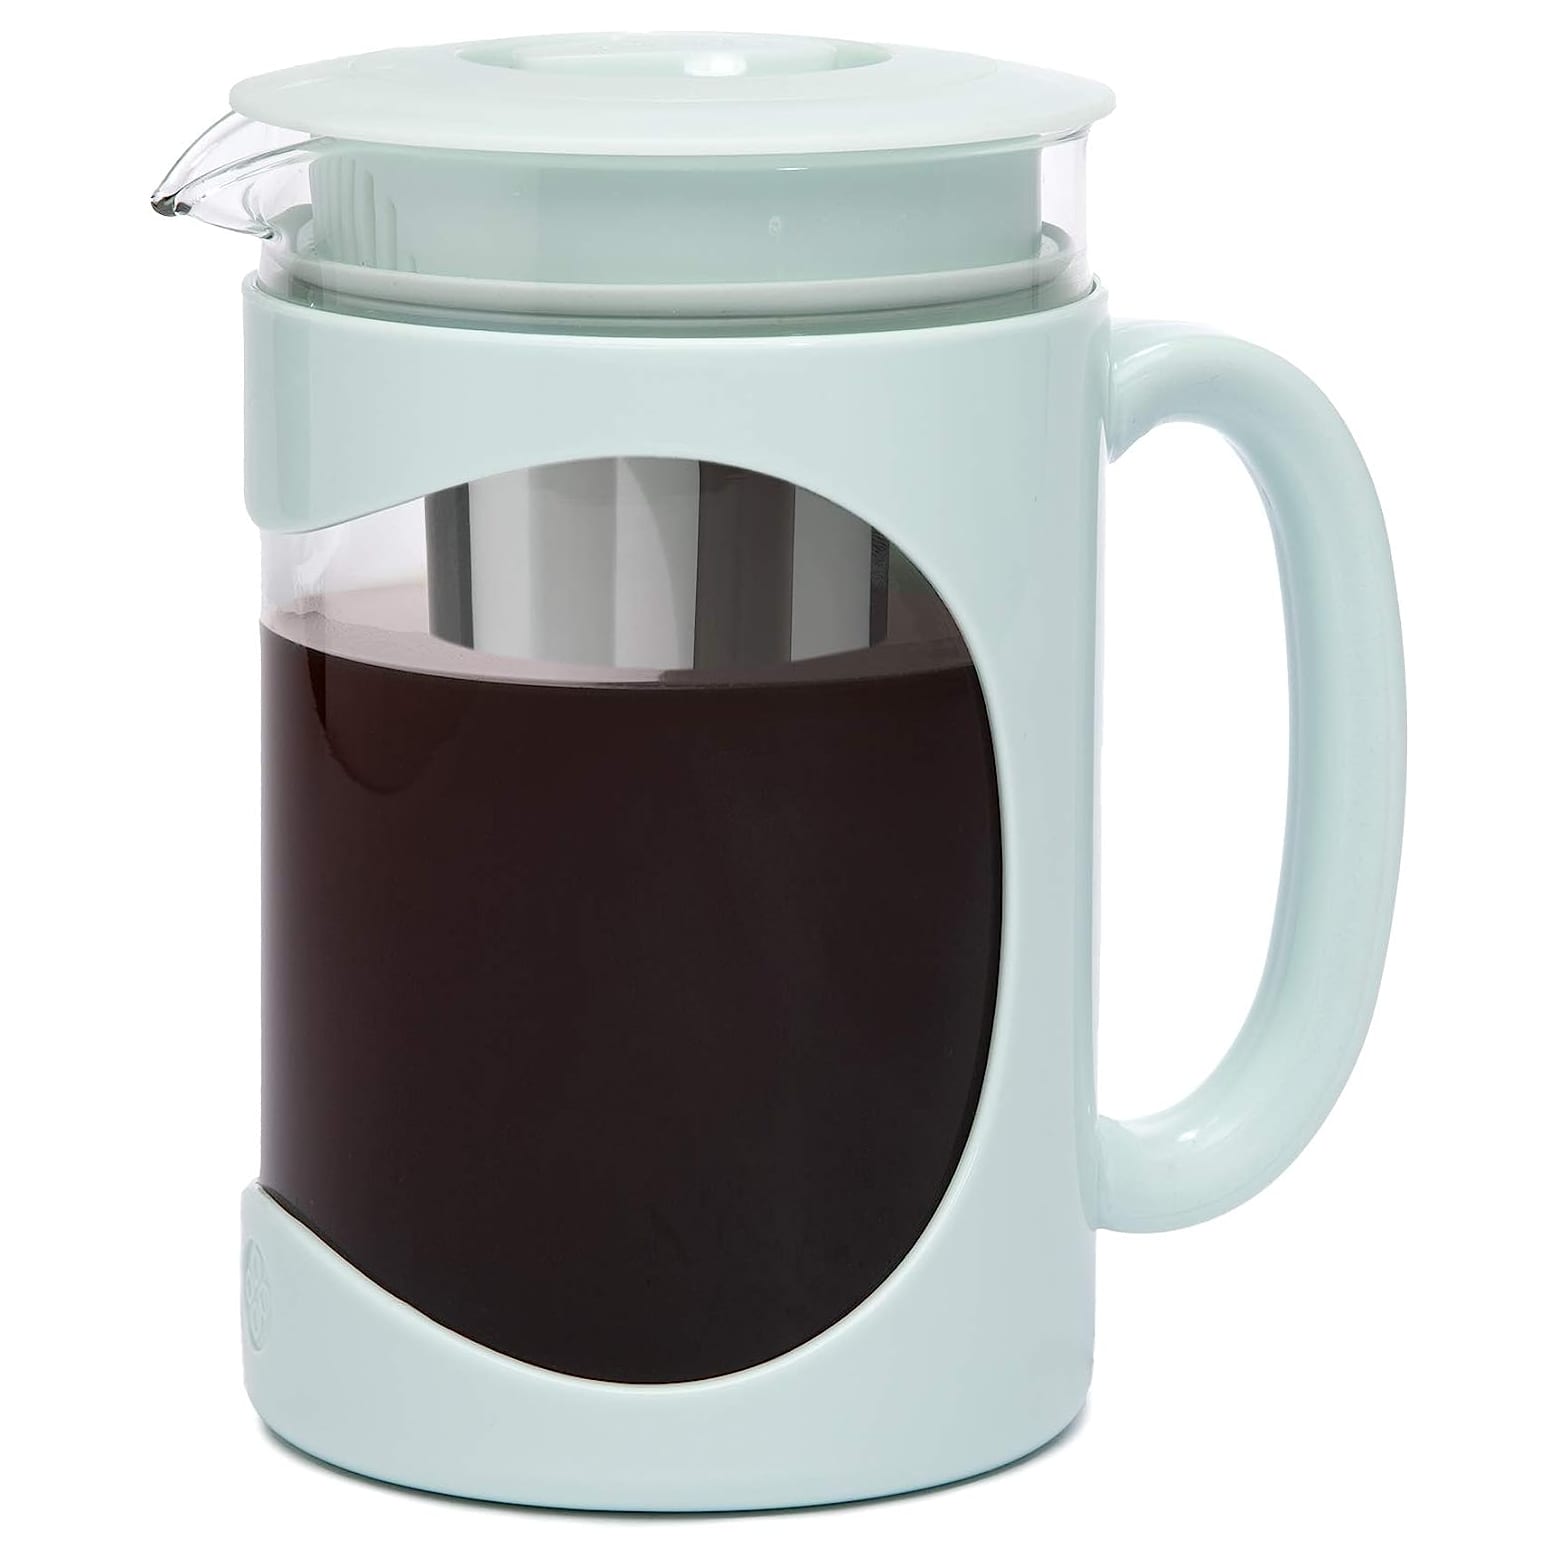 http://cdn.apartmenttherapy.info/image/upload/v1688409825/gen-workflow/product-database/primula-burke-deluxe-cold-brew-iced-coffee-maker-amazon.jpg